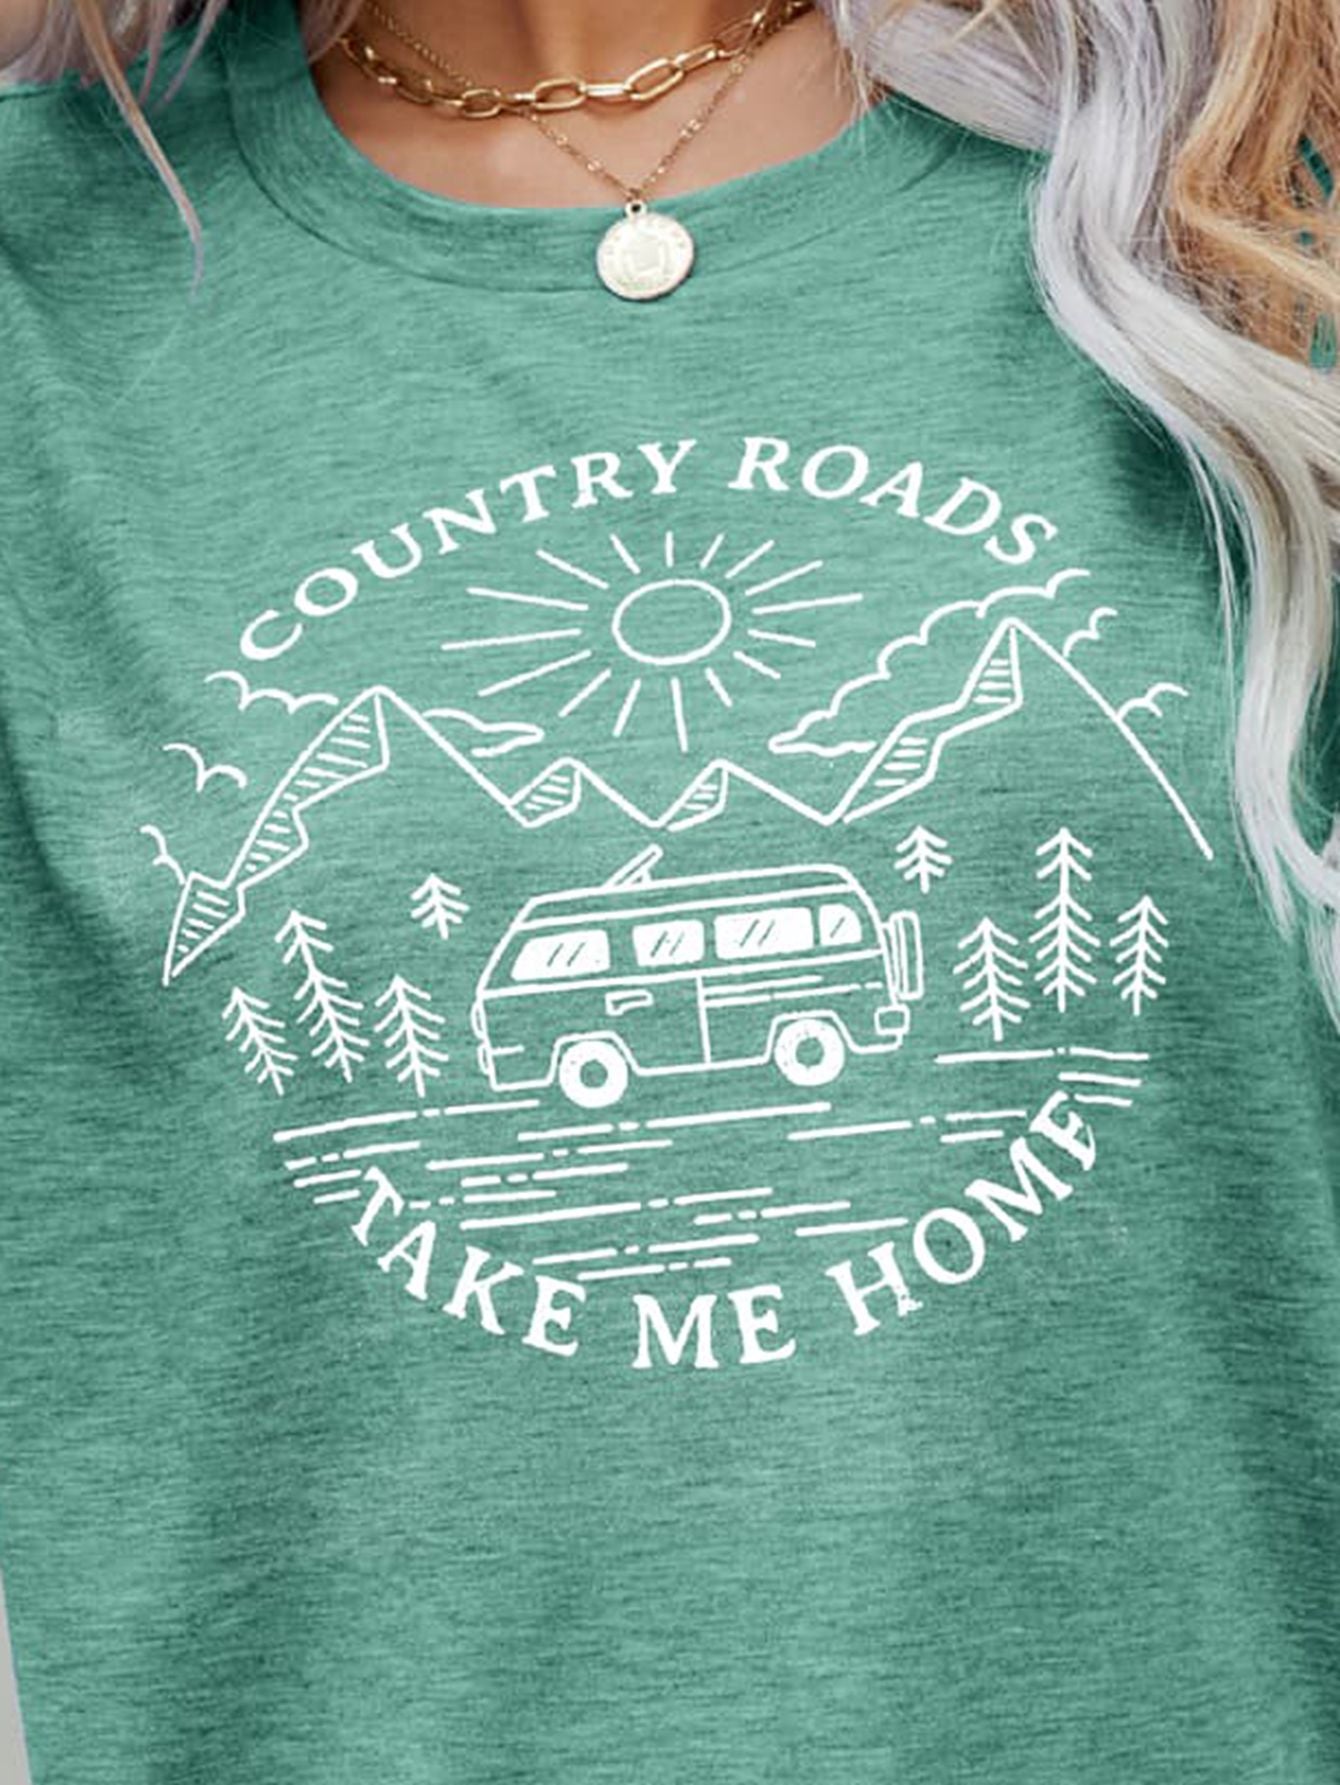 COUNTRY ROADS TAKE ME HOME Graphic Tee The Stout Steer